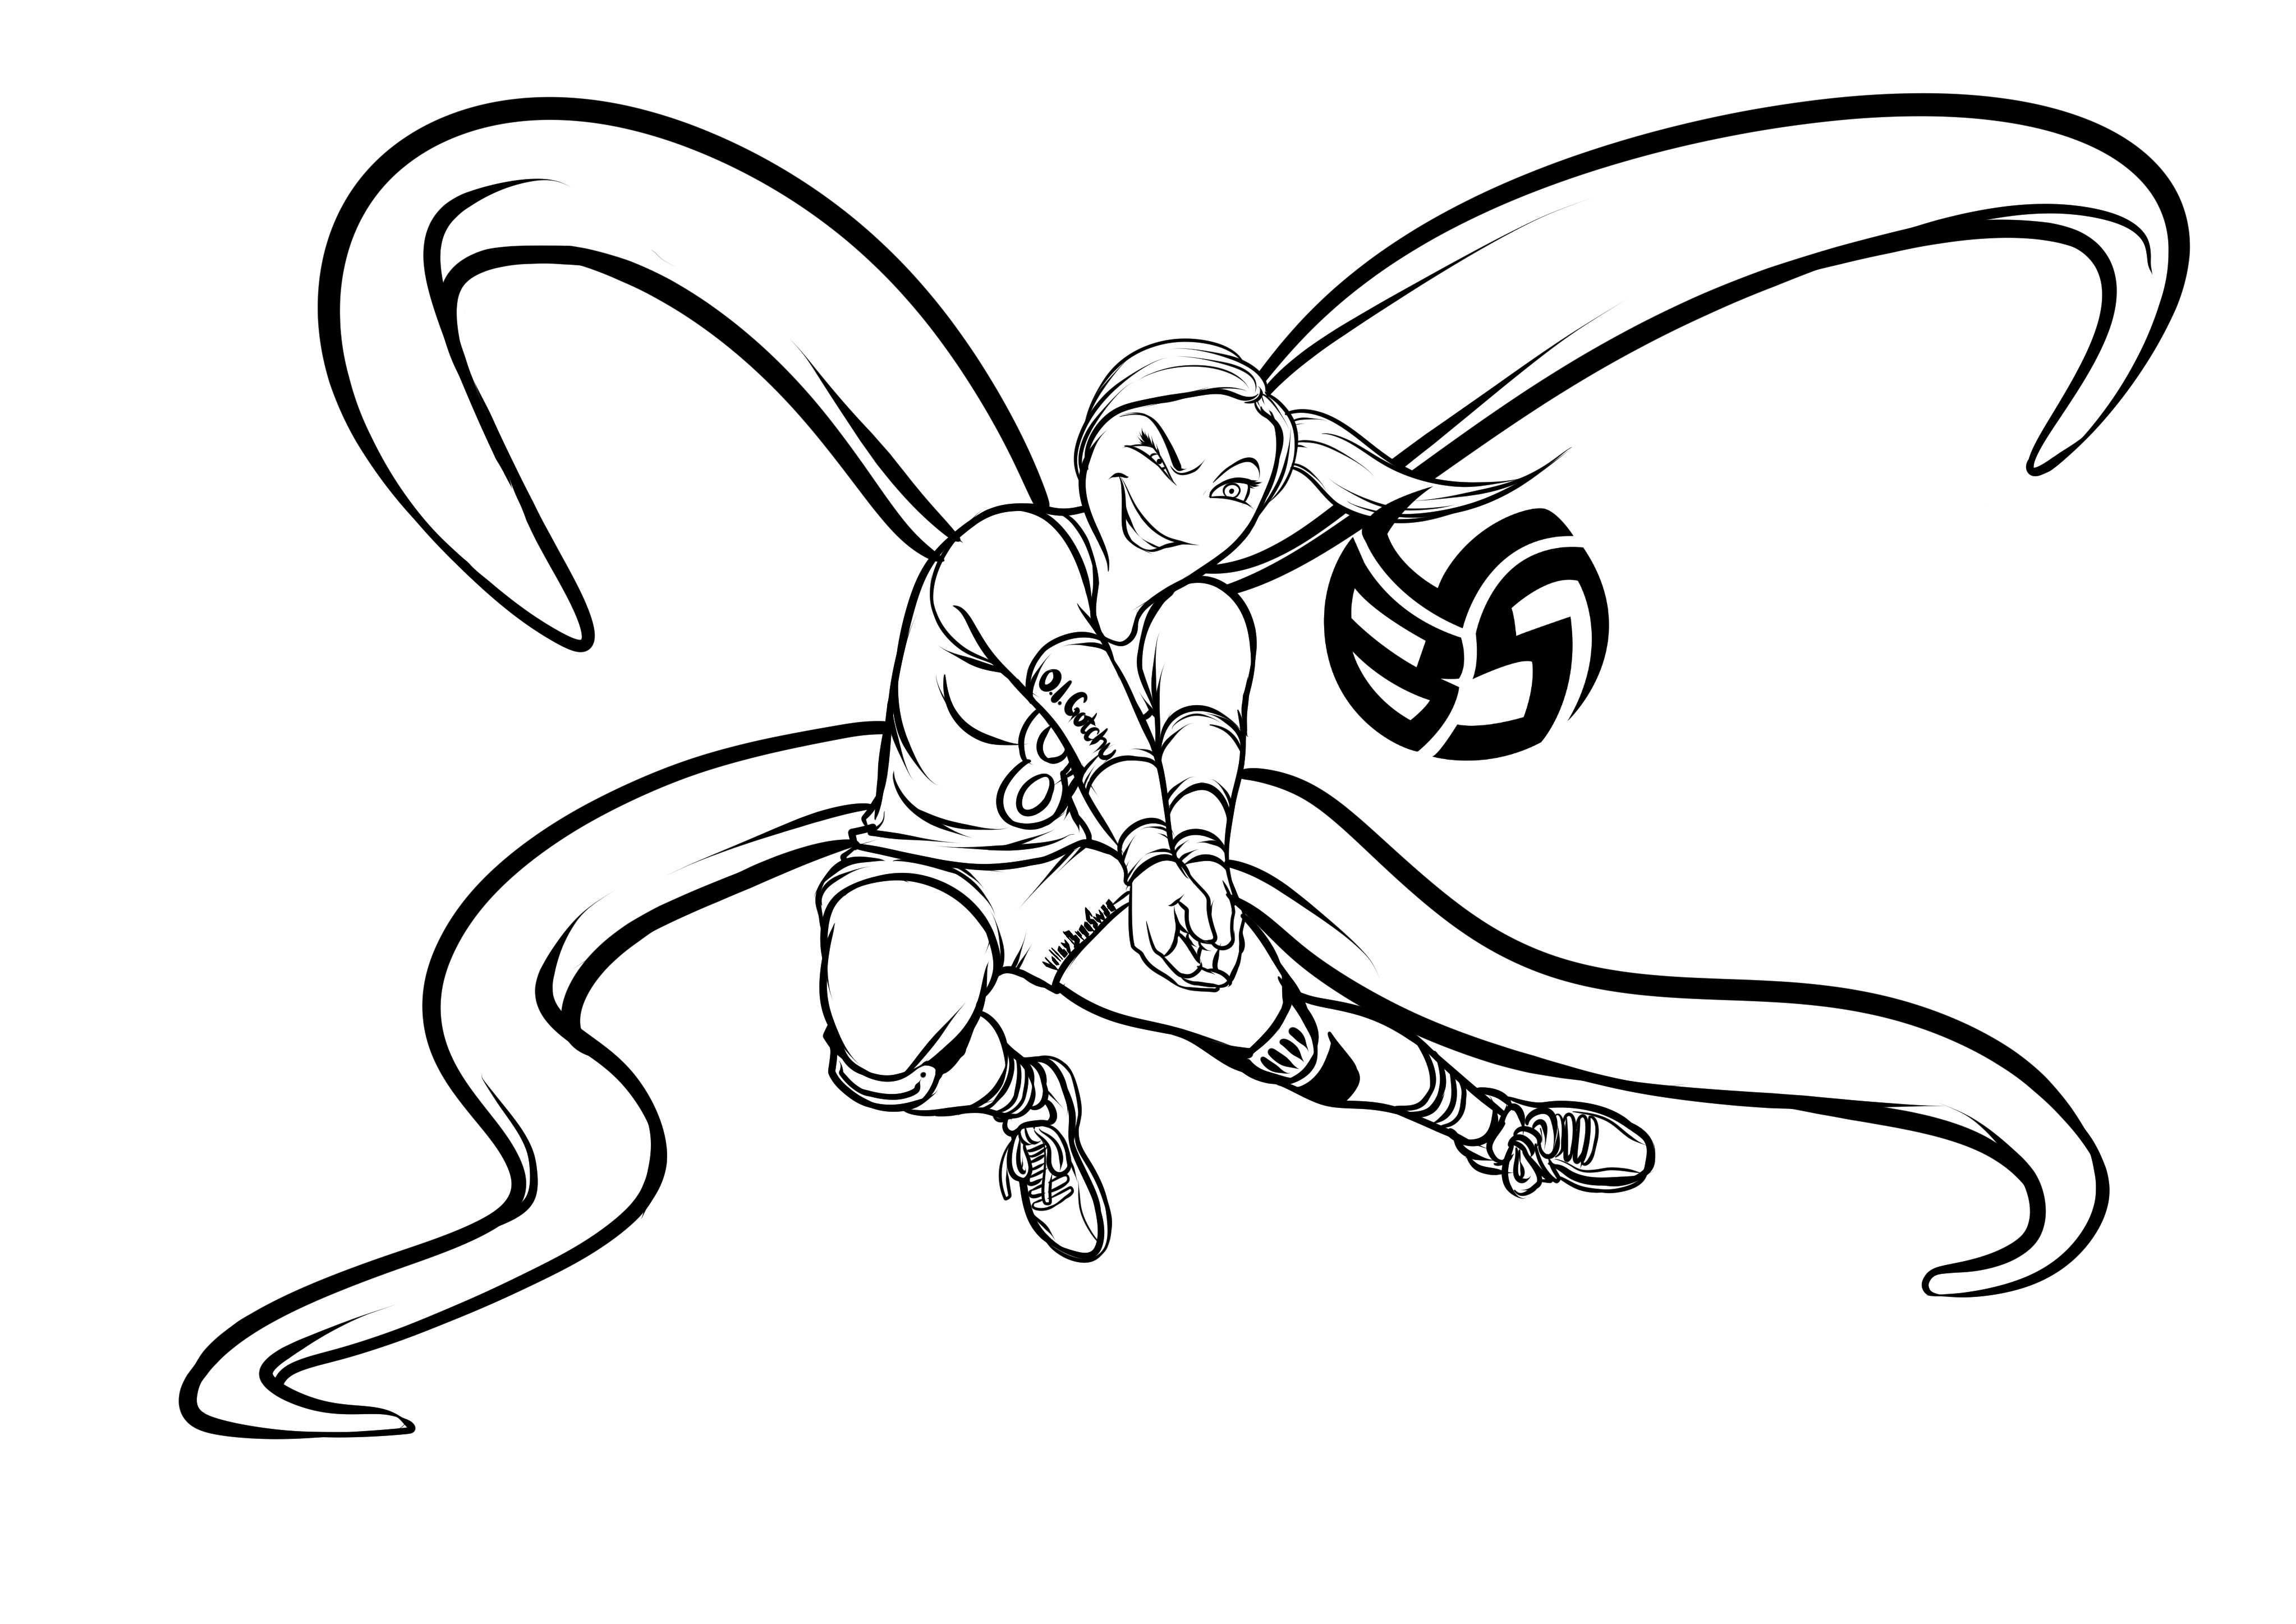 Volleybragswag Coloring Book For Kids With Octopus Coloring Pages